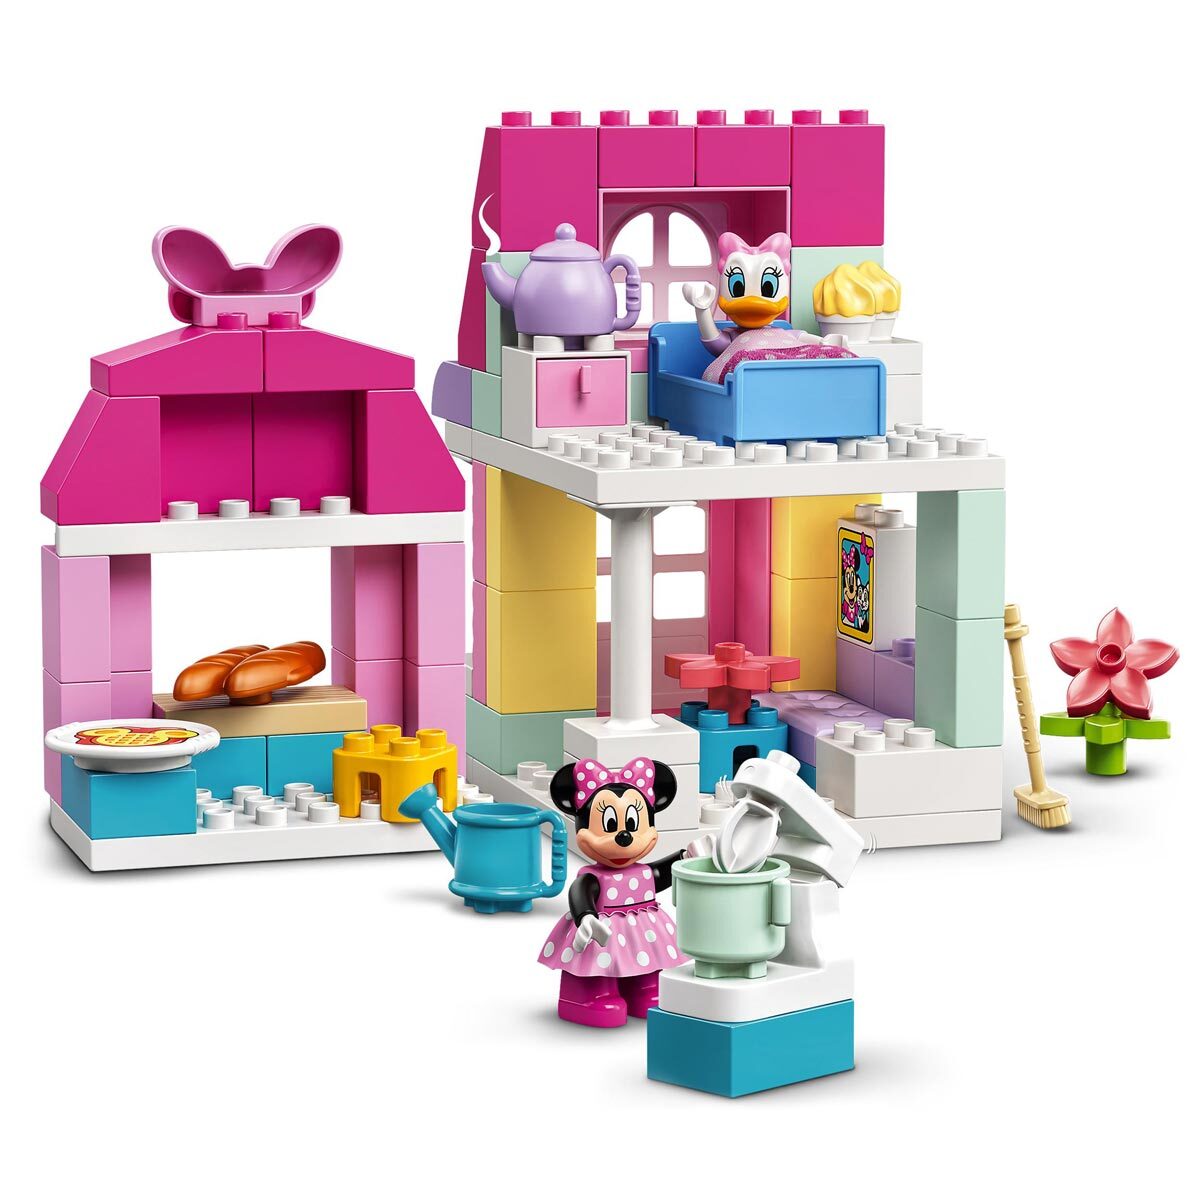 Buy LEGO DUPLO Minnie's House & Cafe Close up Image at costco.co.uk